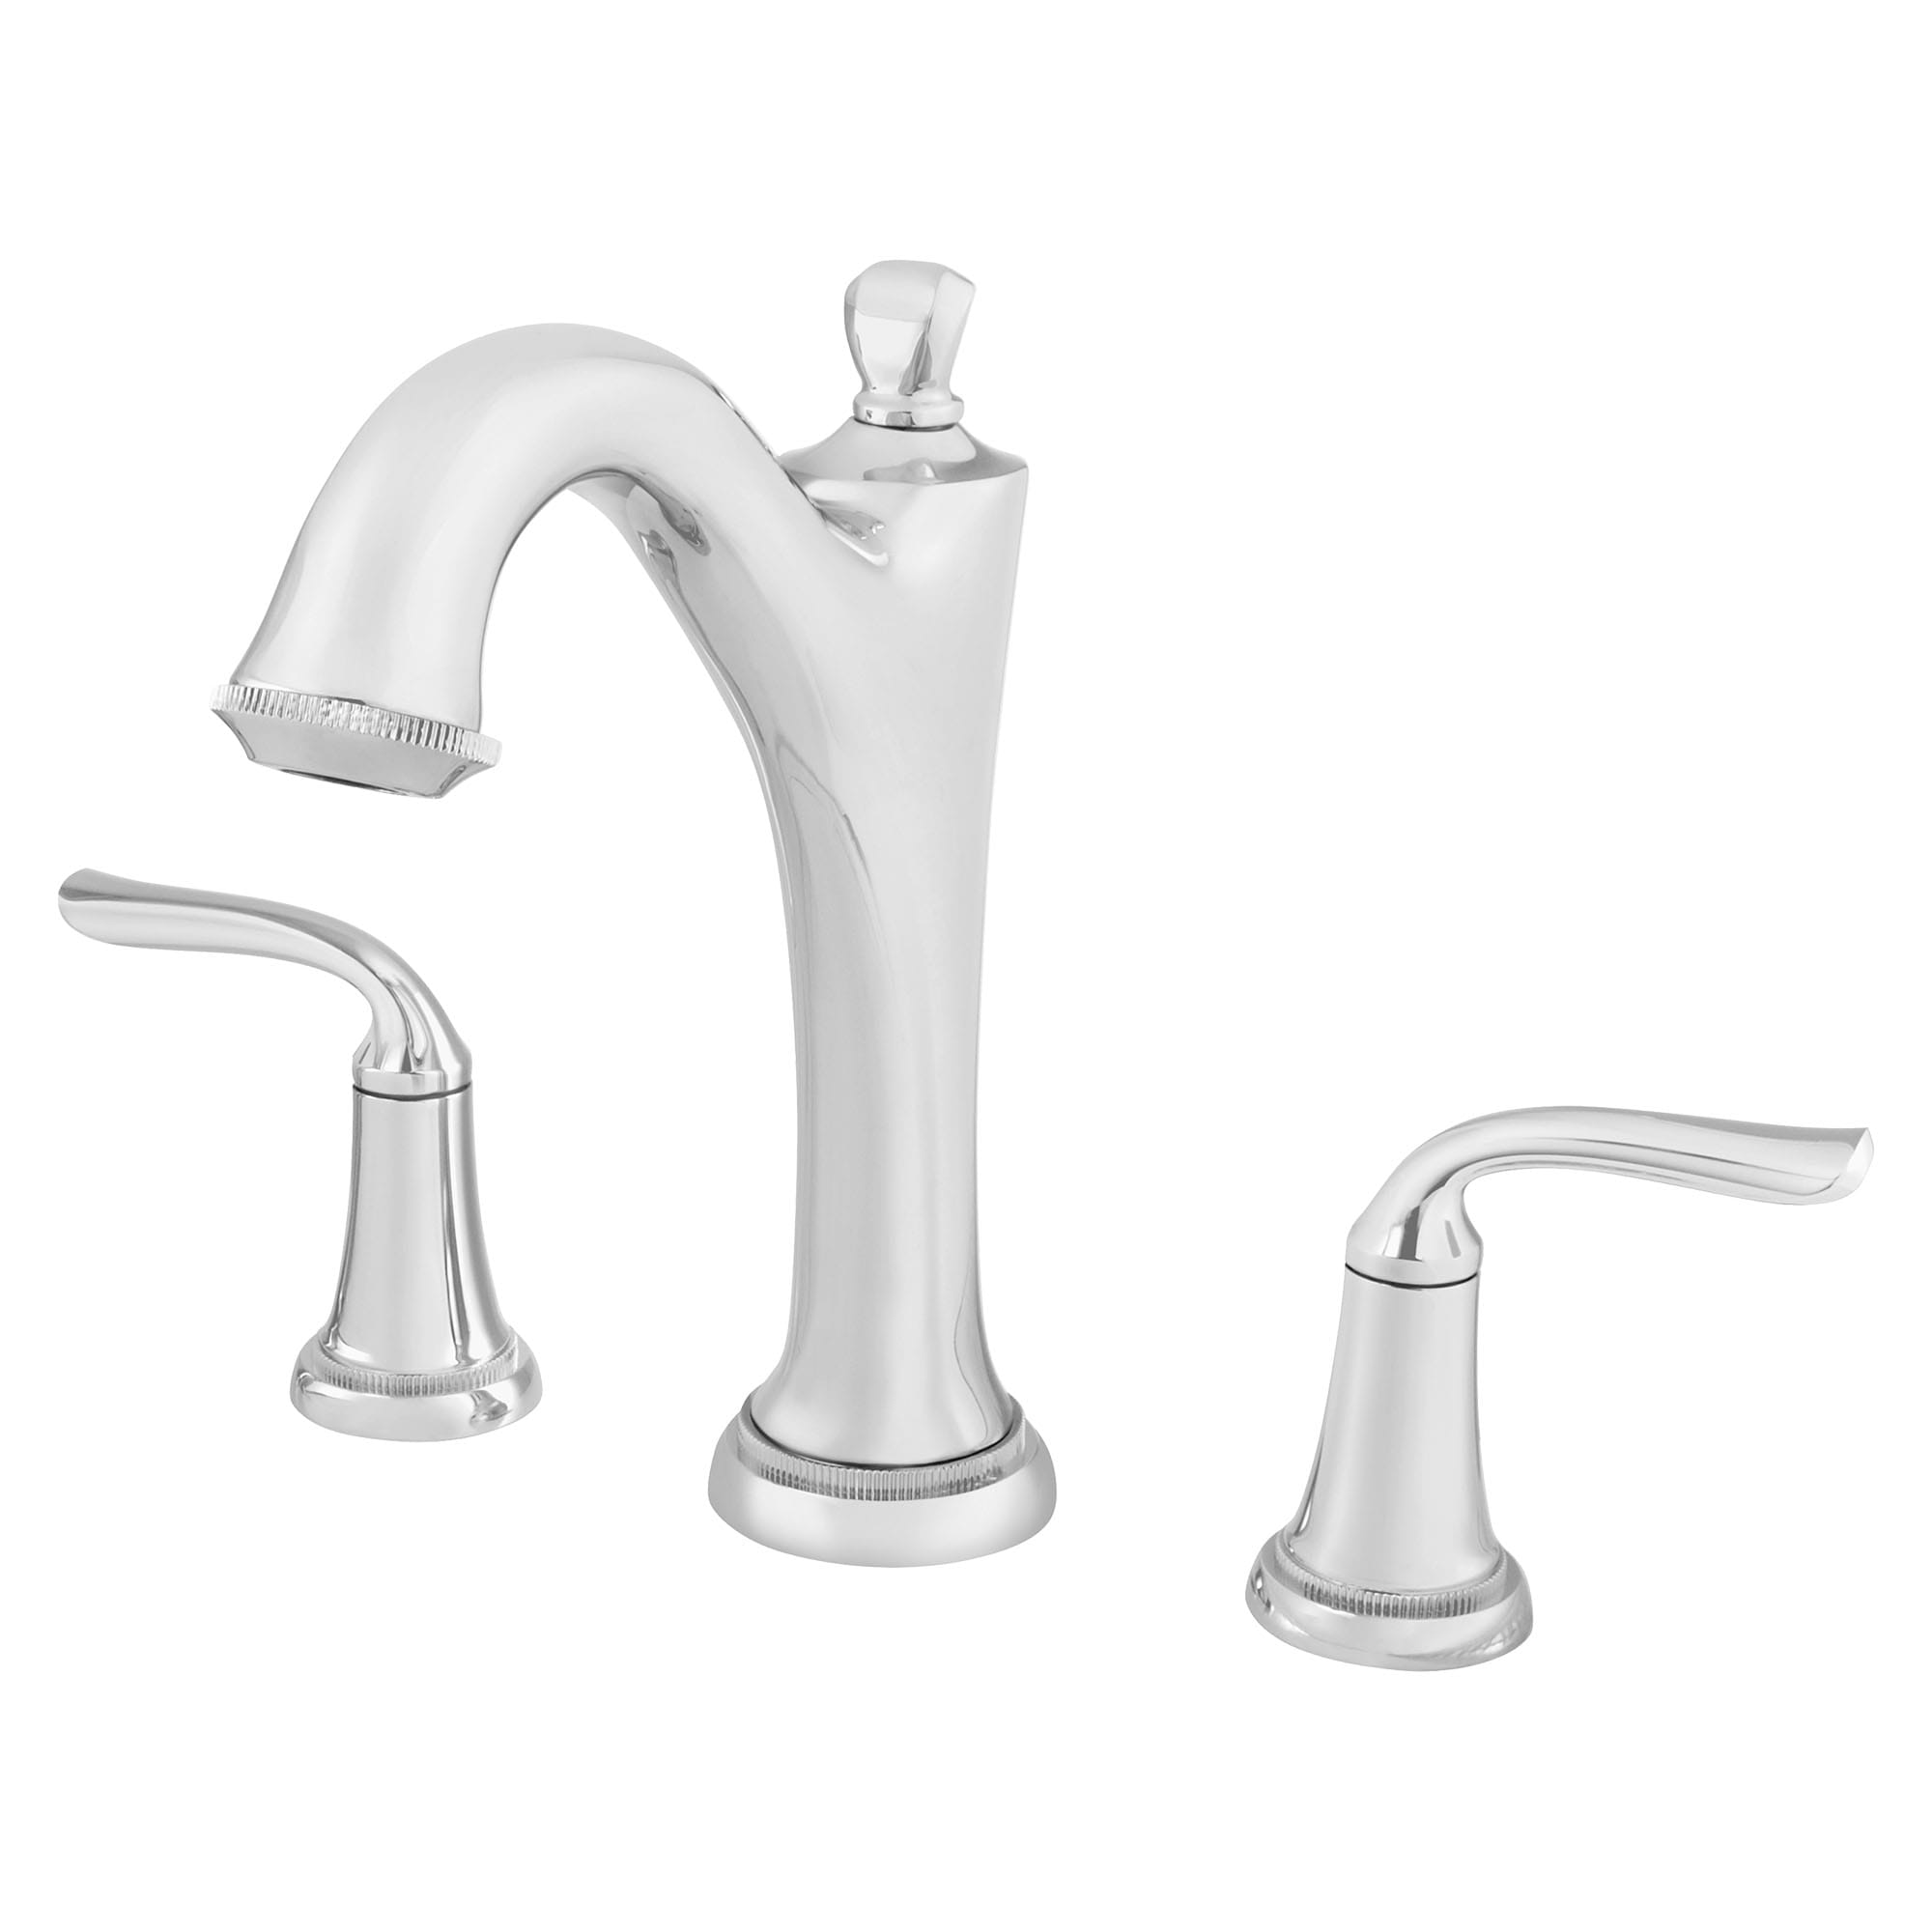 Patience Bathtub Faucet With Lever Handles for Flash Rough In Valve CHROME